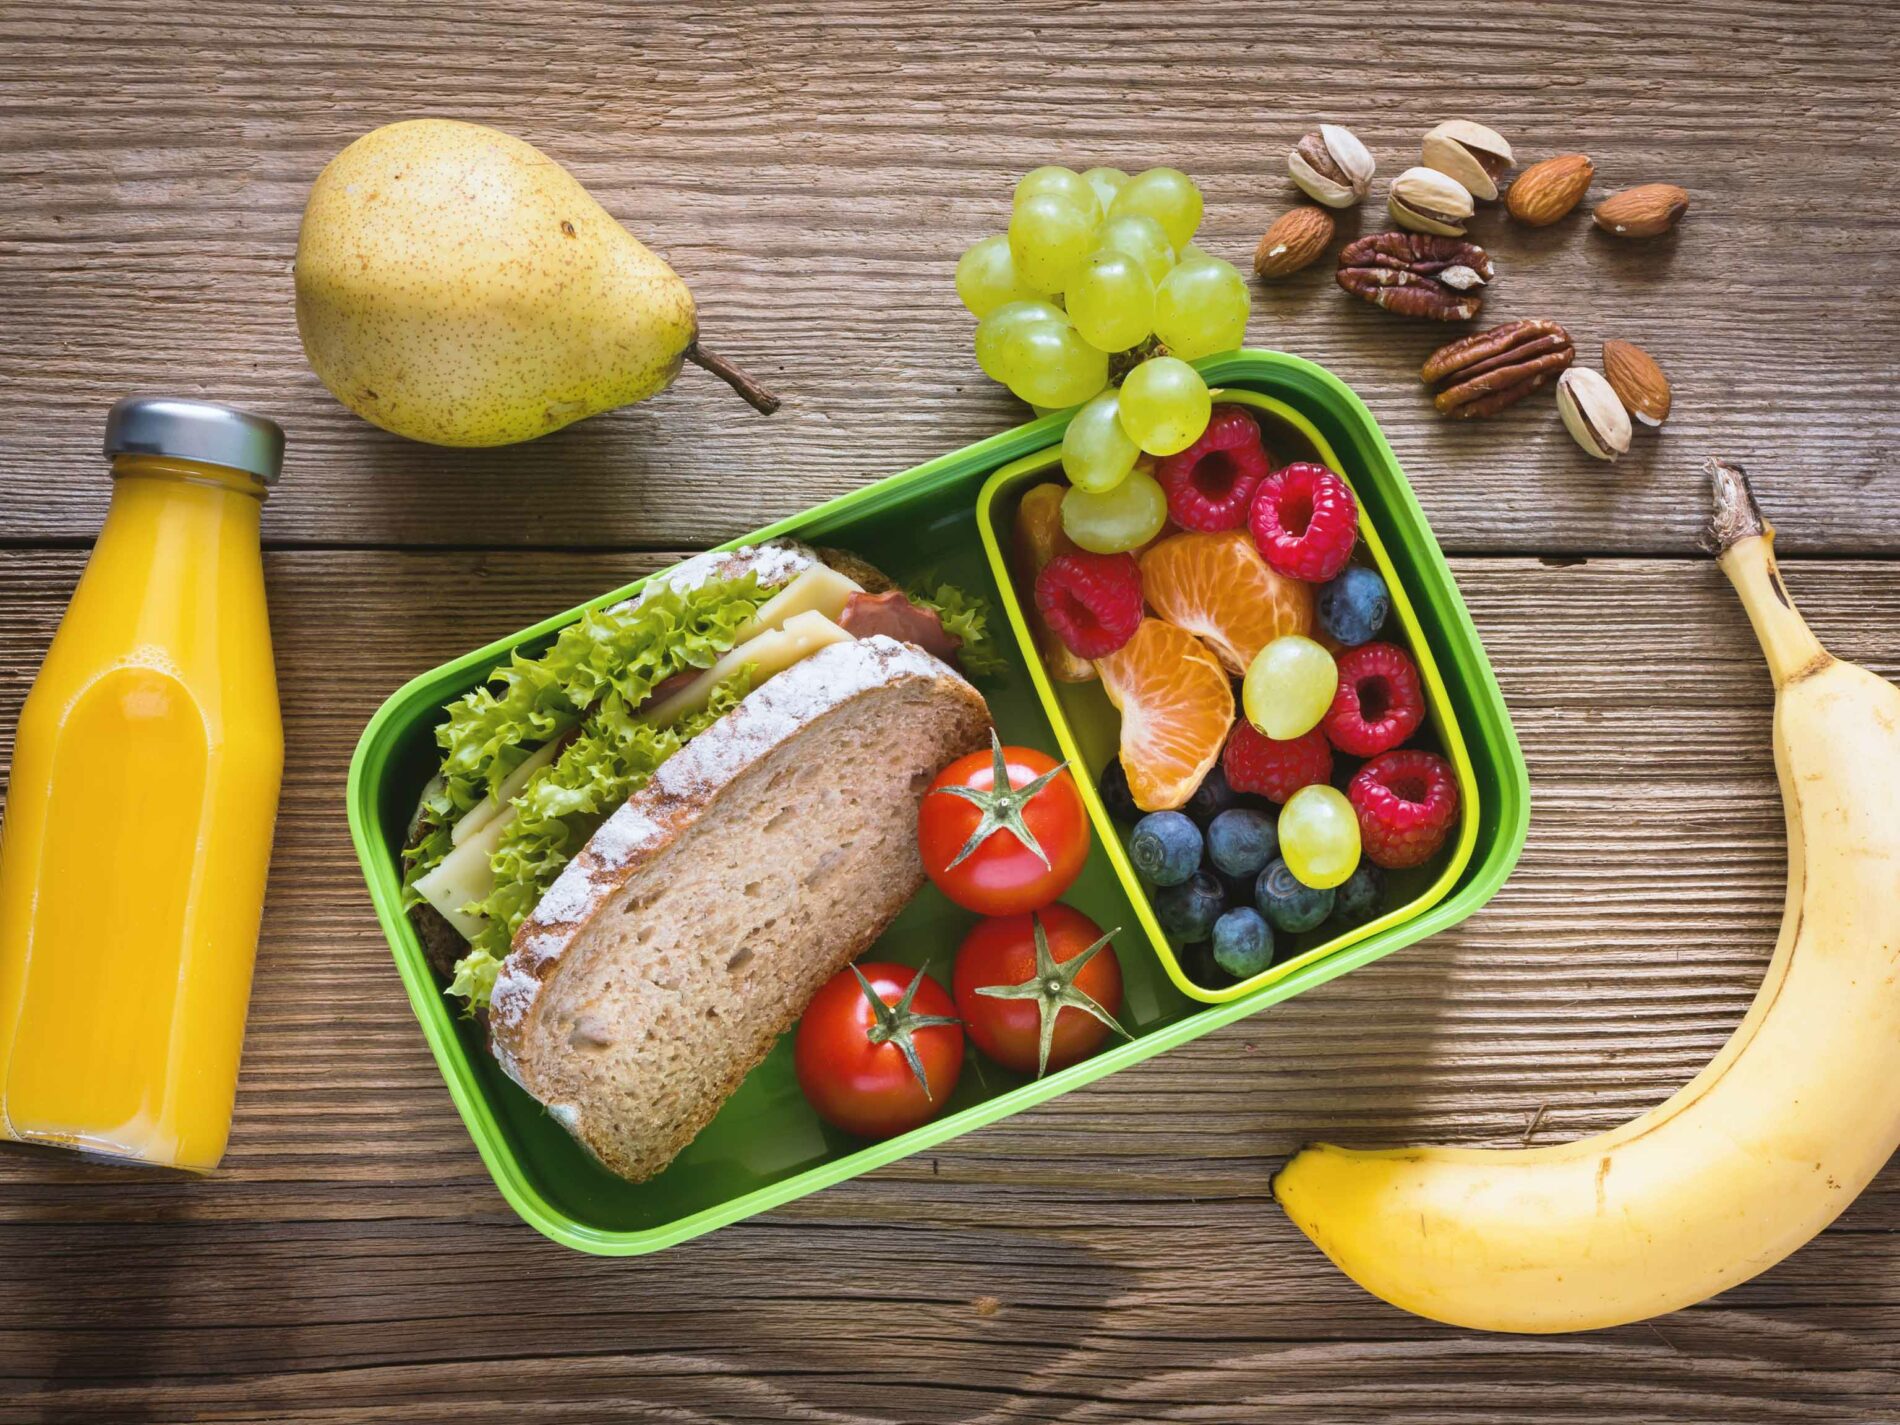 Snack box with orange juice, sandwich, banana, grapes, nuts pear